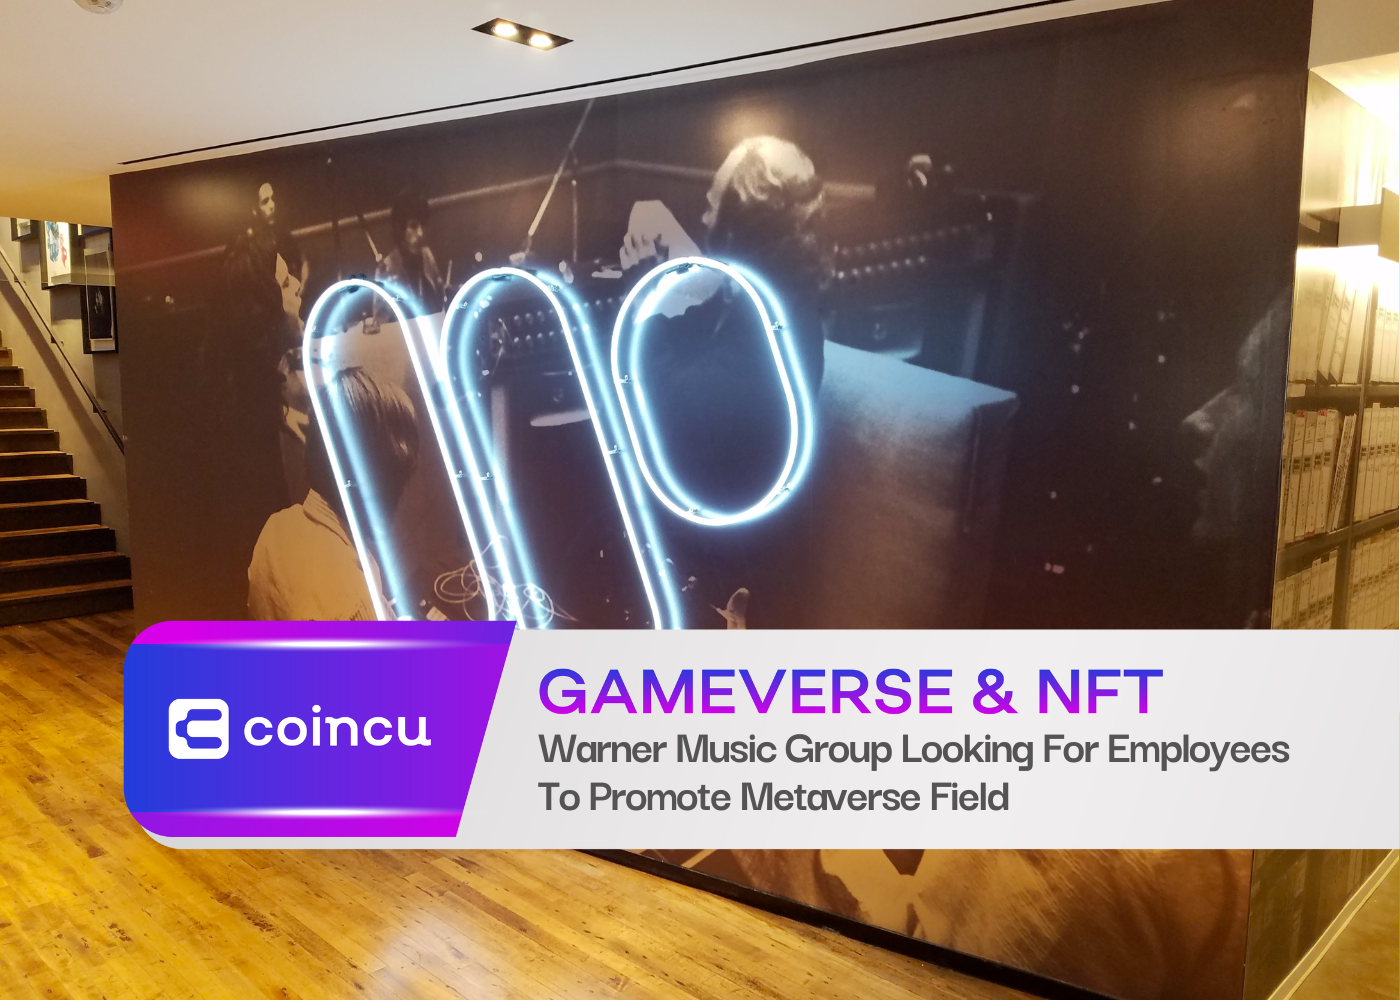 Warner Music Group Looking For Employees To Promote Metaverse Field